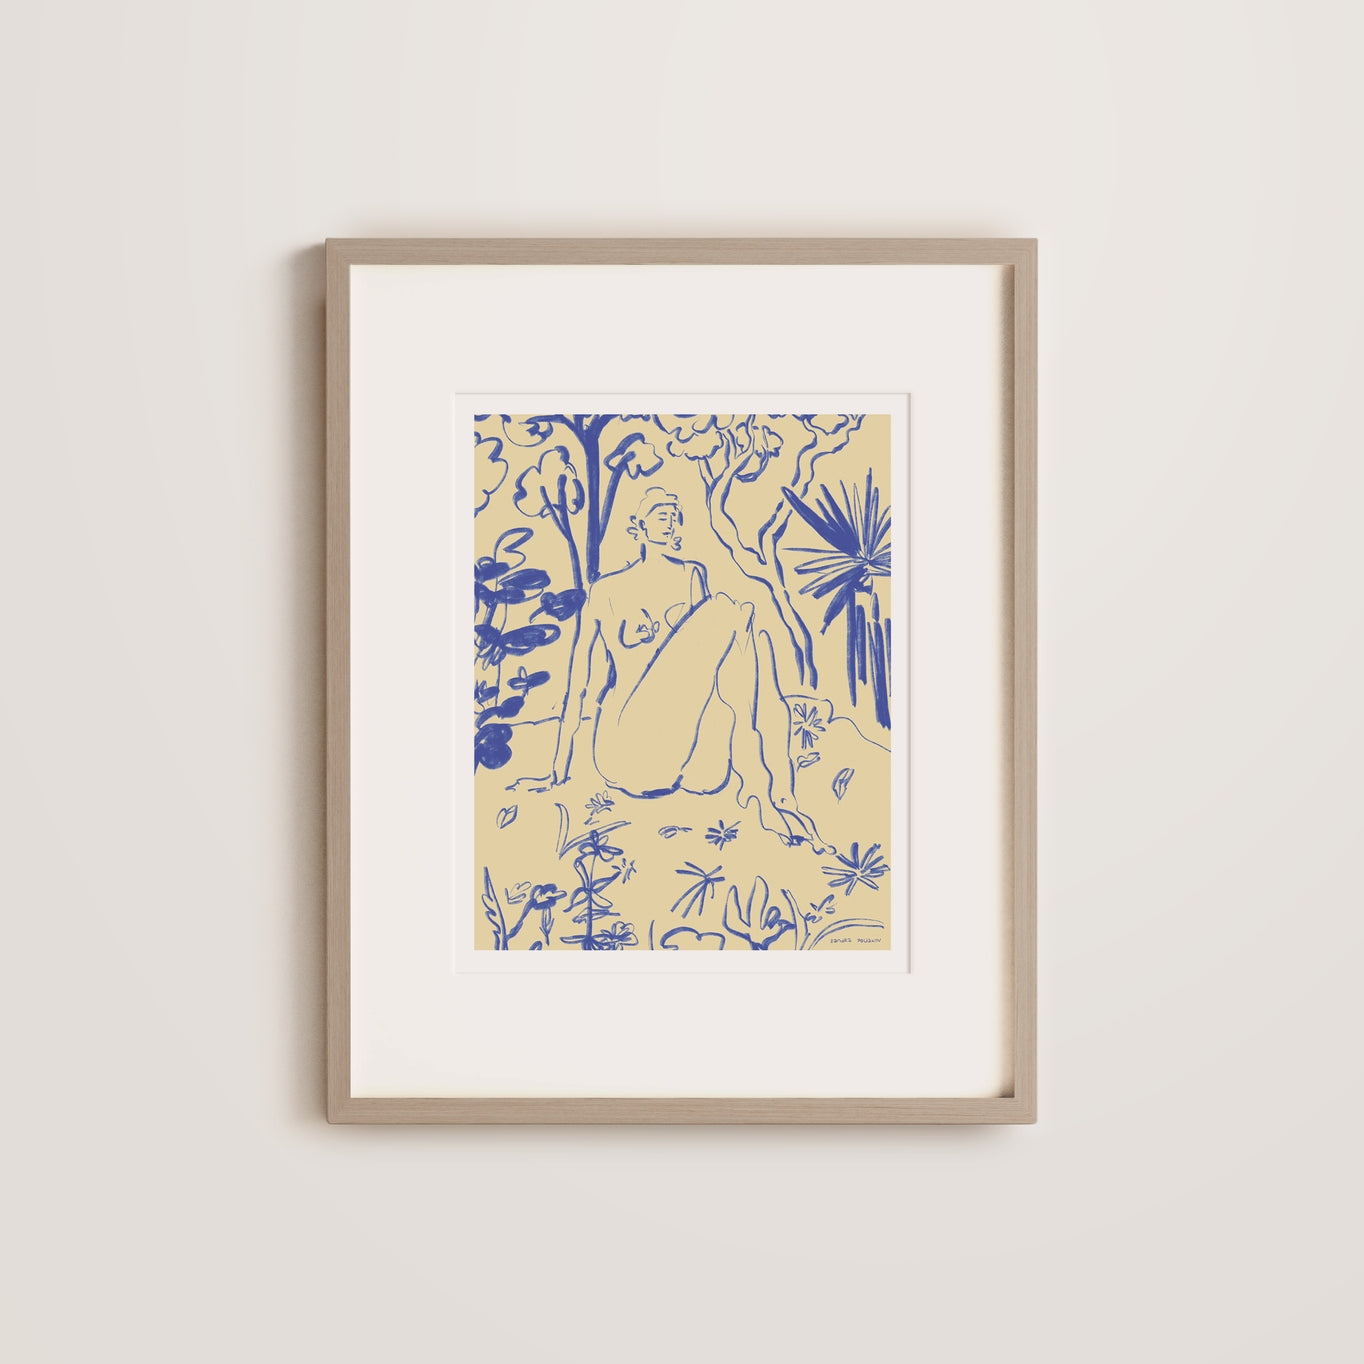 The Blue Lady Print by Someday Studio. Measures 8 x 10", printed on premium paper and packaged in 100% compostable cello sleeve.